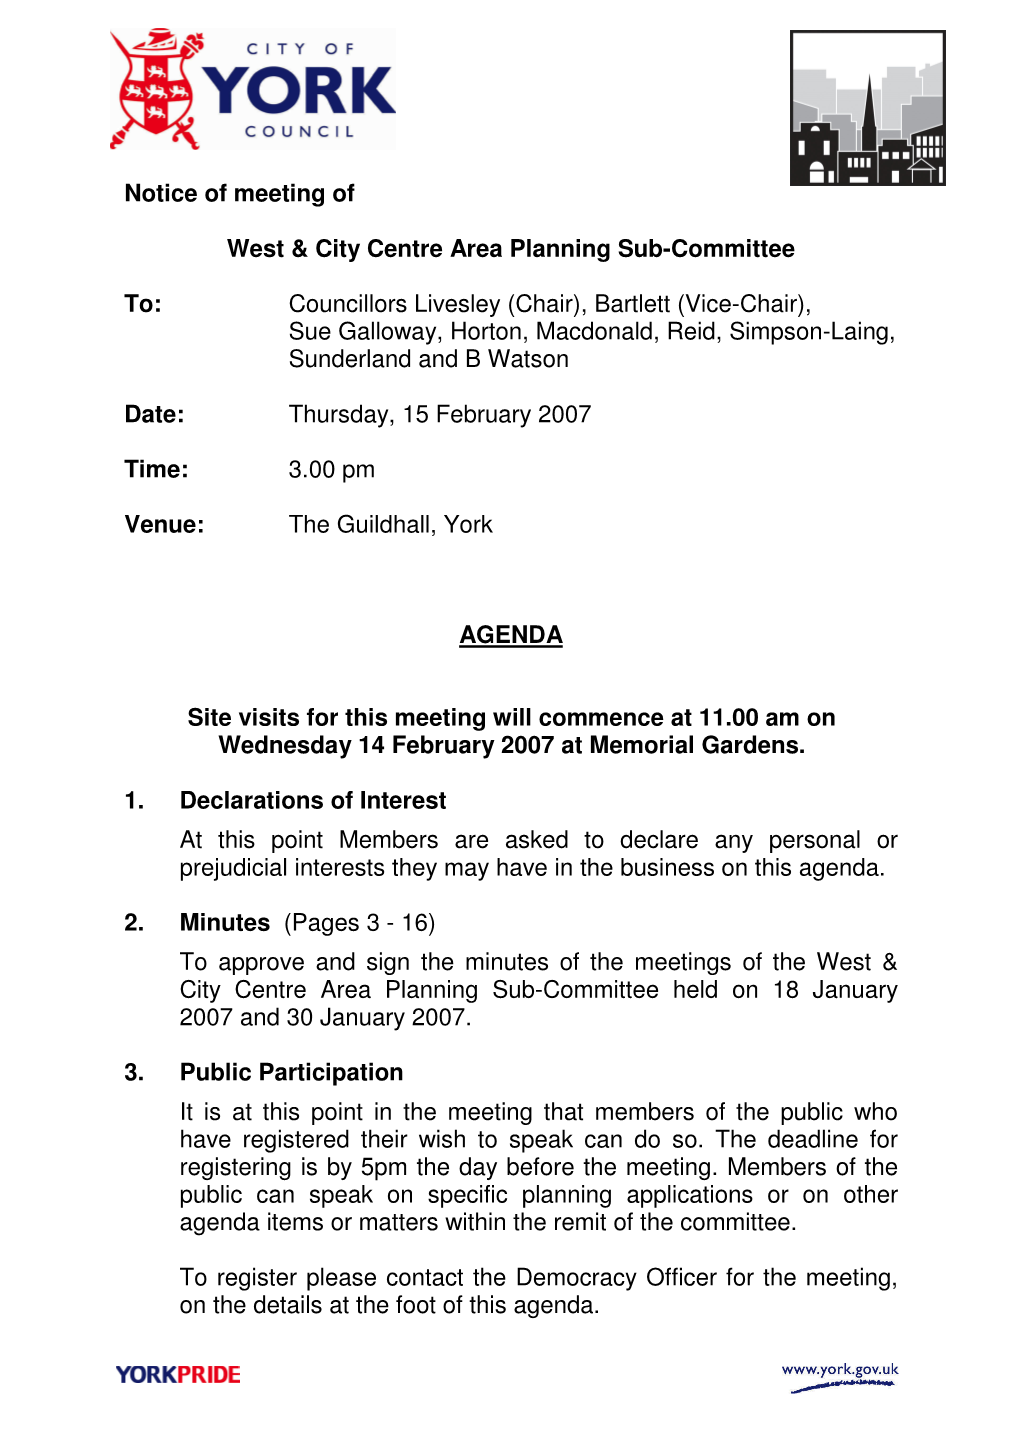 Notice of Meeting of West & City Centre Area Planning Sub